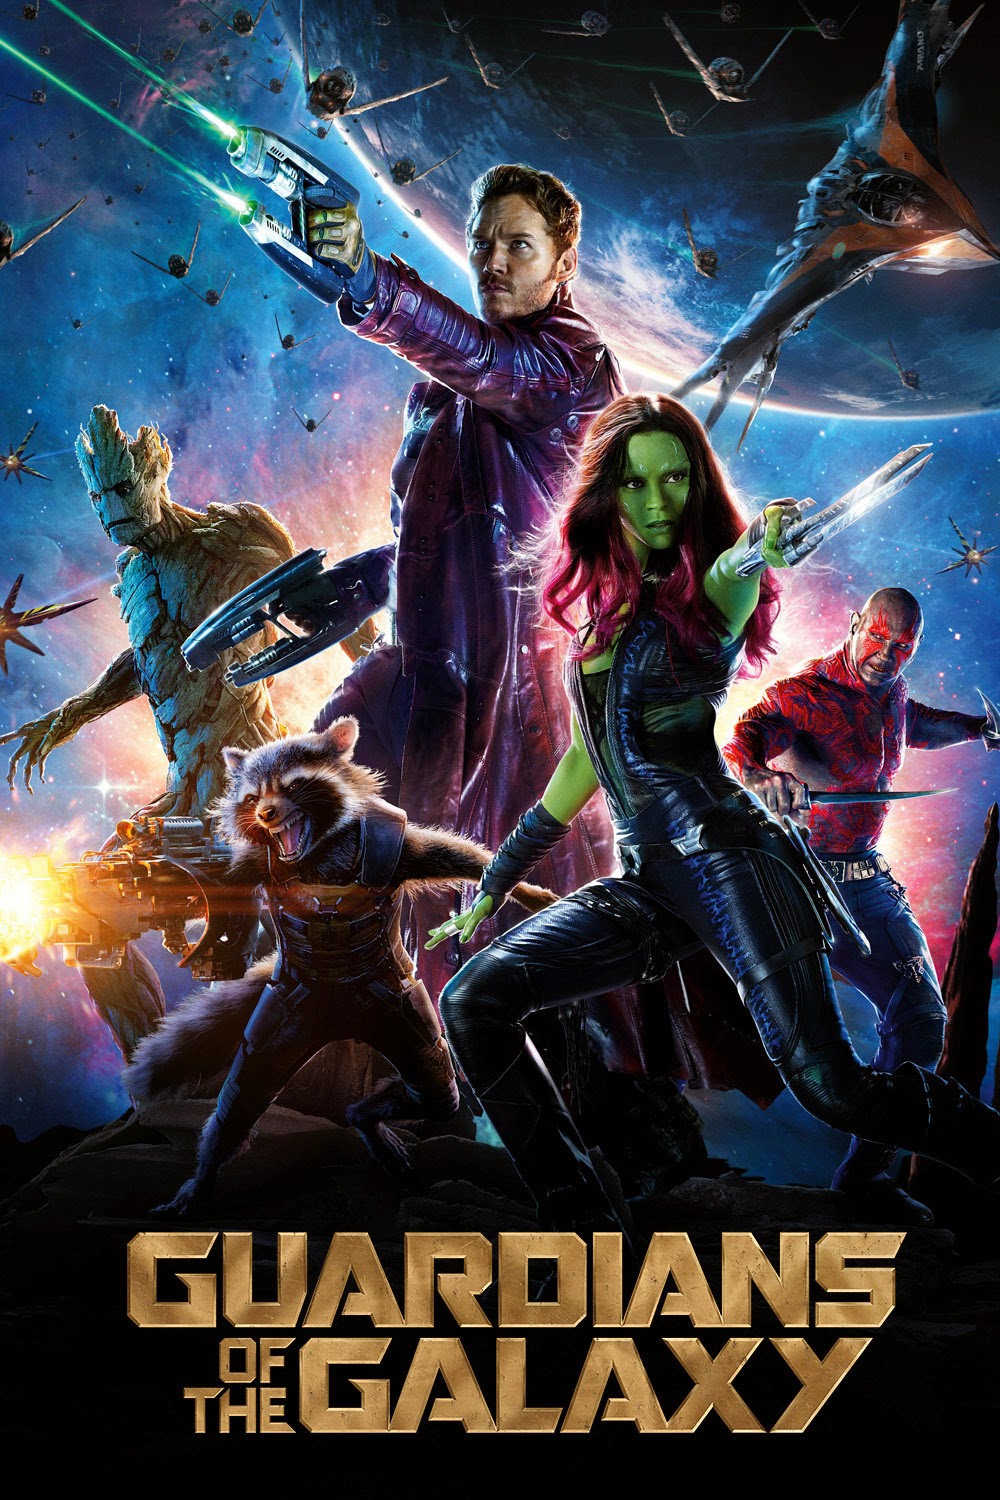 Watch Guardians of the Galaxy Full Movie Streaming Online in HD